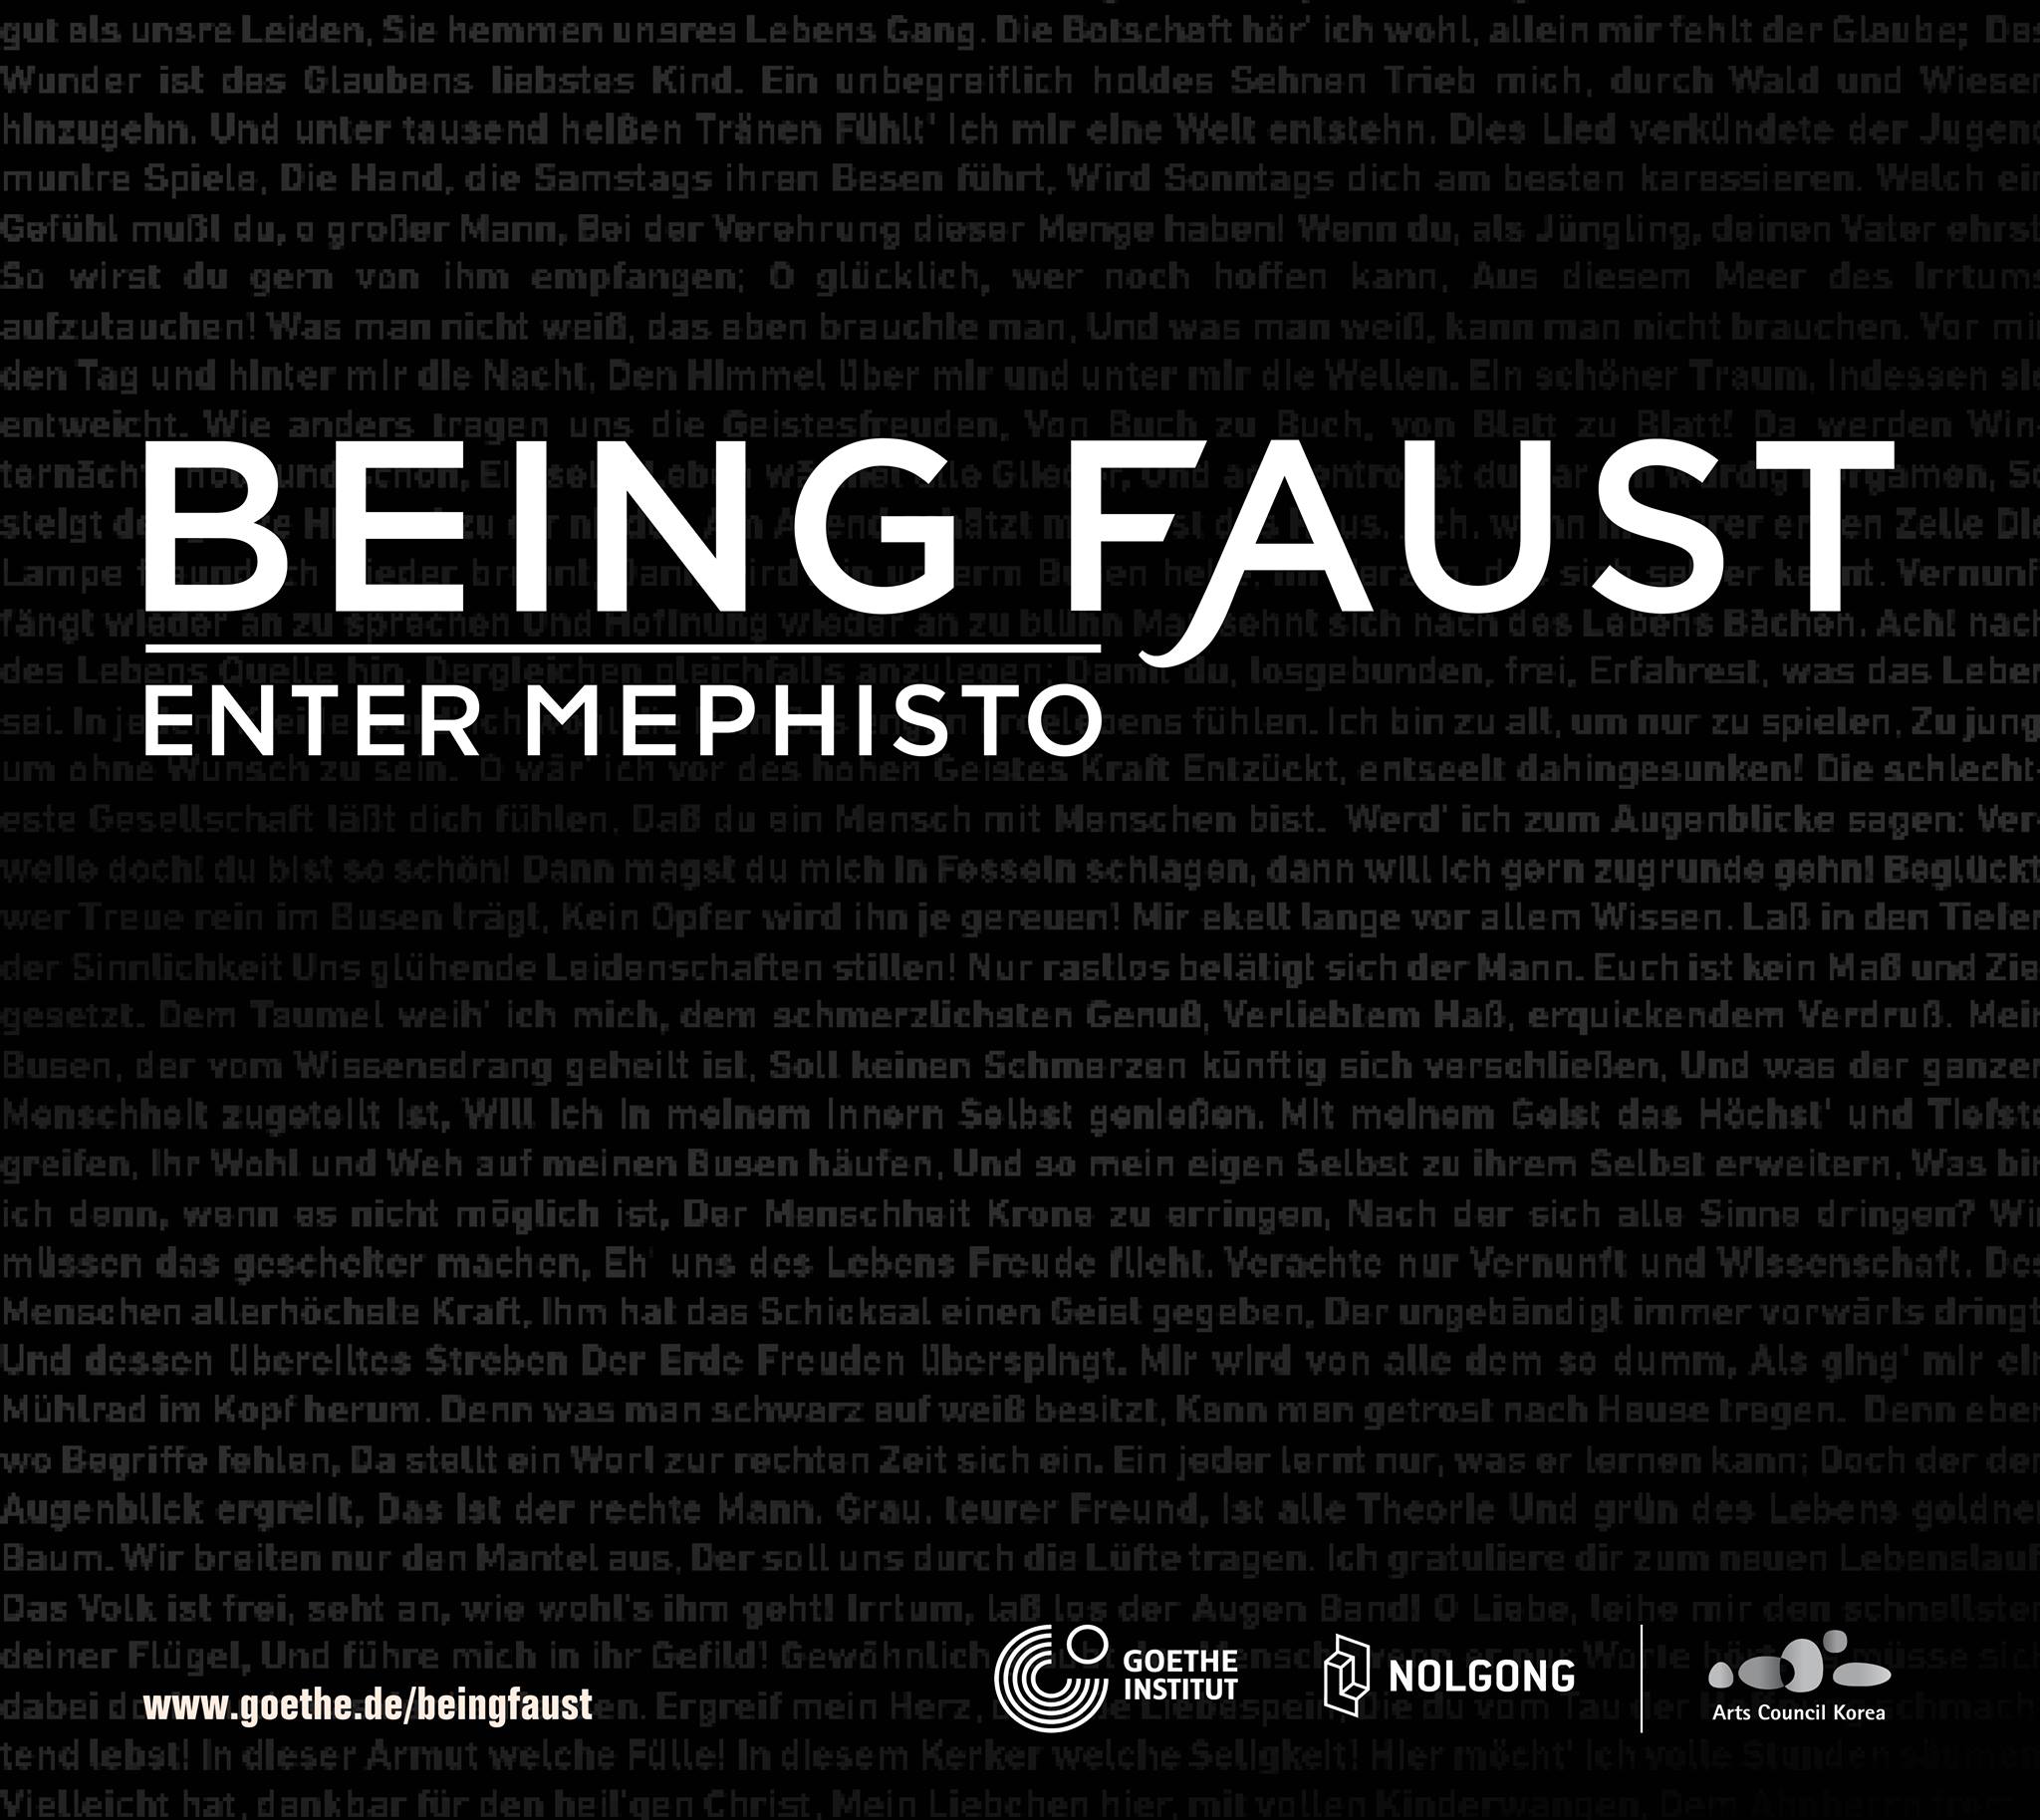 BEING FAUST - ENTER MEPHISTO clock December 4 - December 5 Dec 4 at 2:00pm to Dec 5 at 8:00pm pin Show Map Shutterspace Studios 175 Citigold Plaza, Katipunan Ave.,, 1105 Quezon City, Philippines ticket Find Tickets Tickets Available www.goethe.de “If I sold my friends to find love and get rich … wouldn’t that be a good deal?” Come to the presentation of Goethe-Institut's BEING FAUST - ENTER MEPHISTO, an interactive physical game enhanced with online and social media elements, based on Johann Wolfgang von Goethe's Faust. The game was designed by the Goethe-Institut in cooperation with award-winning Korean game developer NOLGONG. BEING FAUST - ENTER MEPHISTO arrives in Manila December 4 and 5. There is no entrance fee to join the game, the only things you'll need are a smartphone and a facebook account. Dates & Time slots: December 4, 2 PM and 5 PM December 5, 12 PM, 3 PM and 6 PM Each session lasts 1 hr 30 mins, please arrive 15 minutes before the session starts. For more information, please follow this link: http://www.goethe.de/ins/kr/seo/prj/fau/deindex.htm Registration begins on November 24 by following this link: http://www.goethe.de/ins/kr/seo/prj/fau/reg/enindex.htm Please note that there are some technological requirements for the participation in the game: - You need a web-enabled mobile device (WiFi-access will be provided). - This device needs to run on the mobile operating systems iOS (version 8 and later) or Android (version 4.4 and later). - Make sure your battery is sufficiently charged. And bring your power bank or charger (sockets are available at the venue).